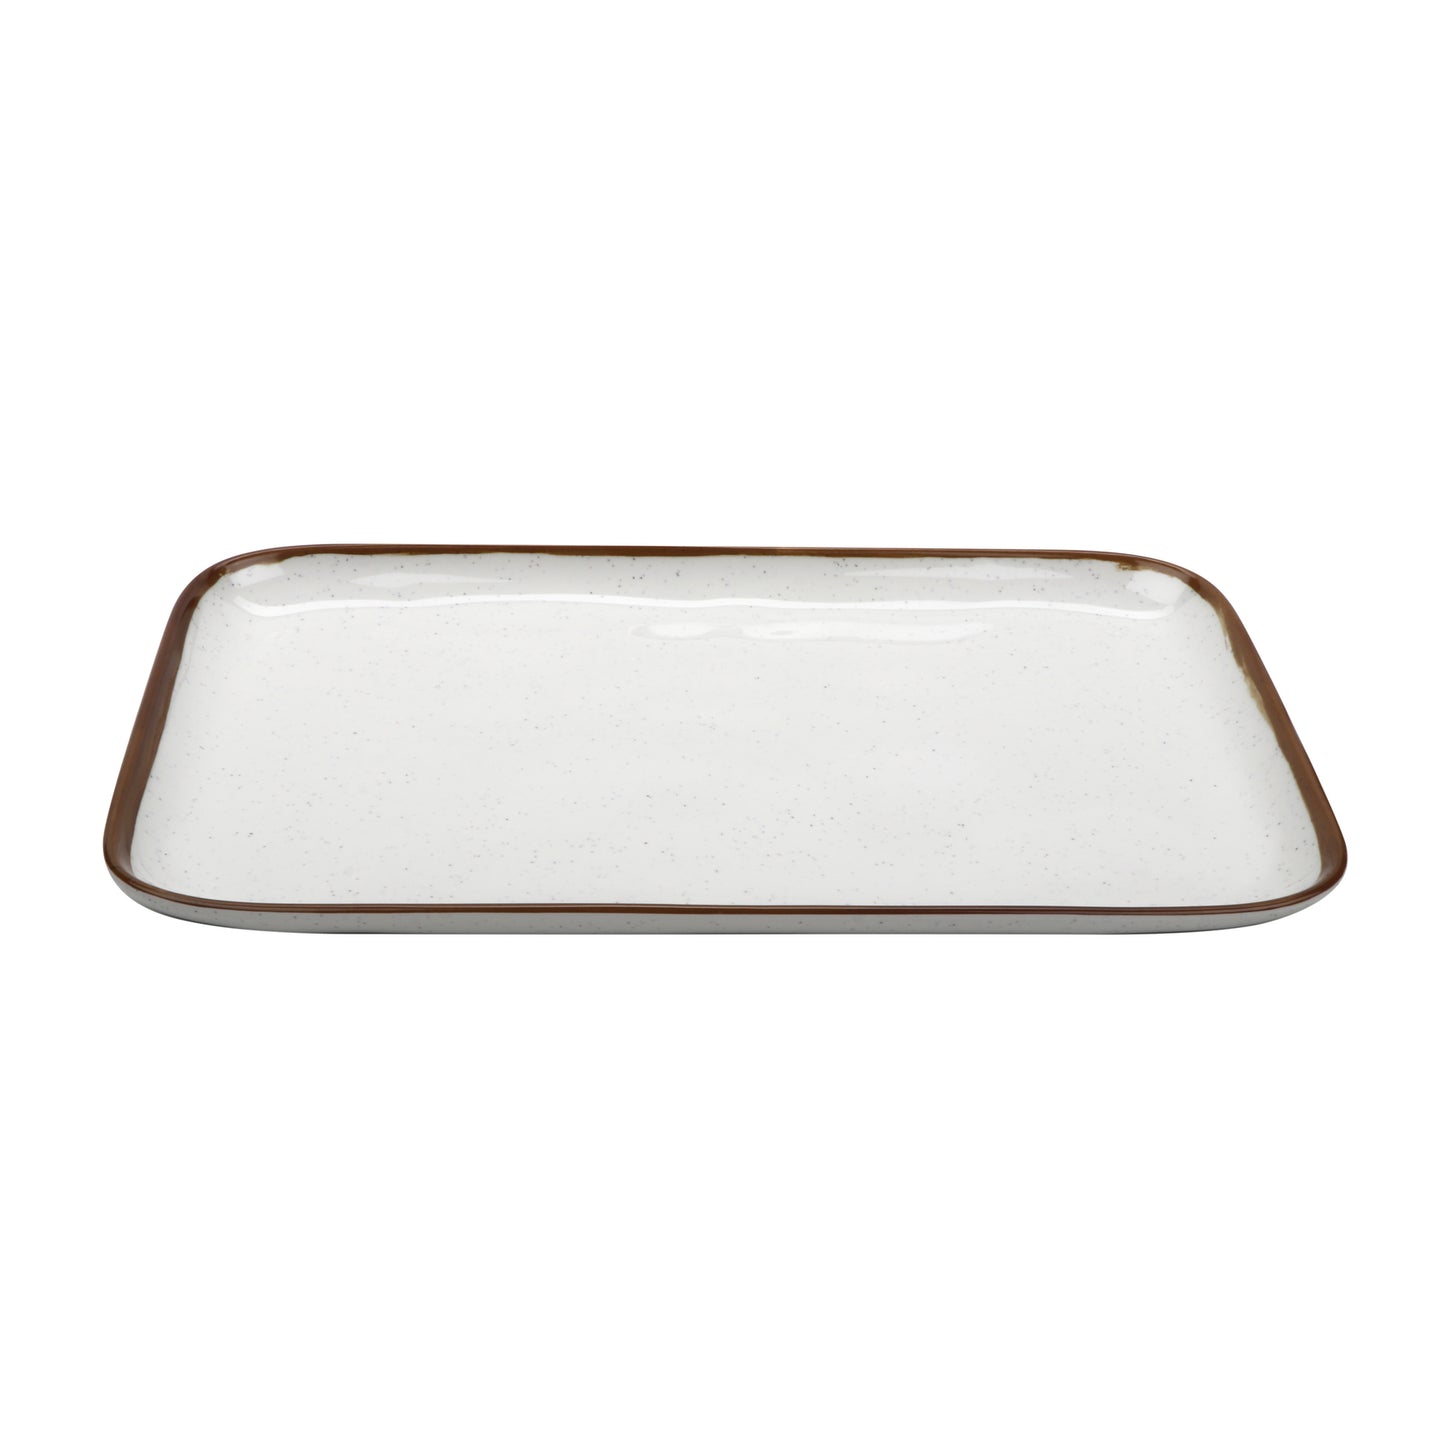 18" x 11" Melamine, Rectangular Coupe Display Tray, G.E.T. Rustic Mill